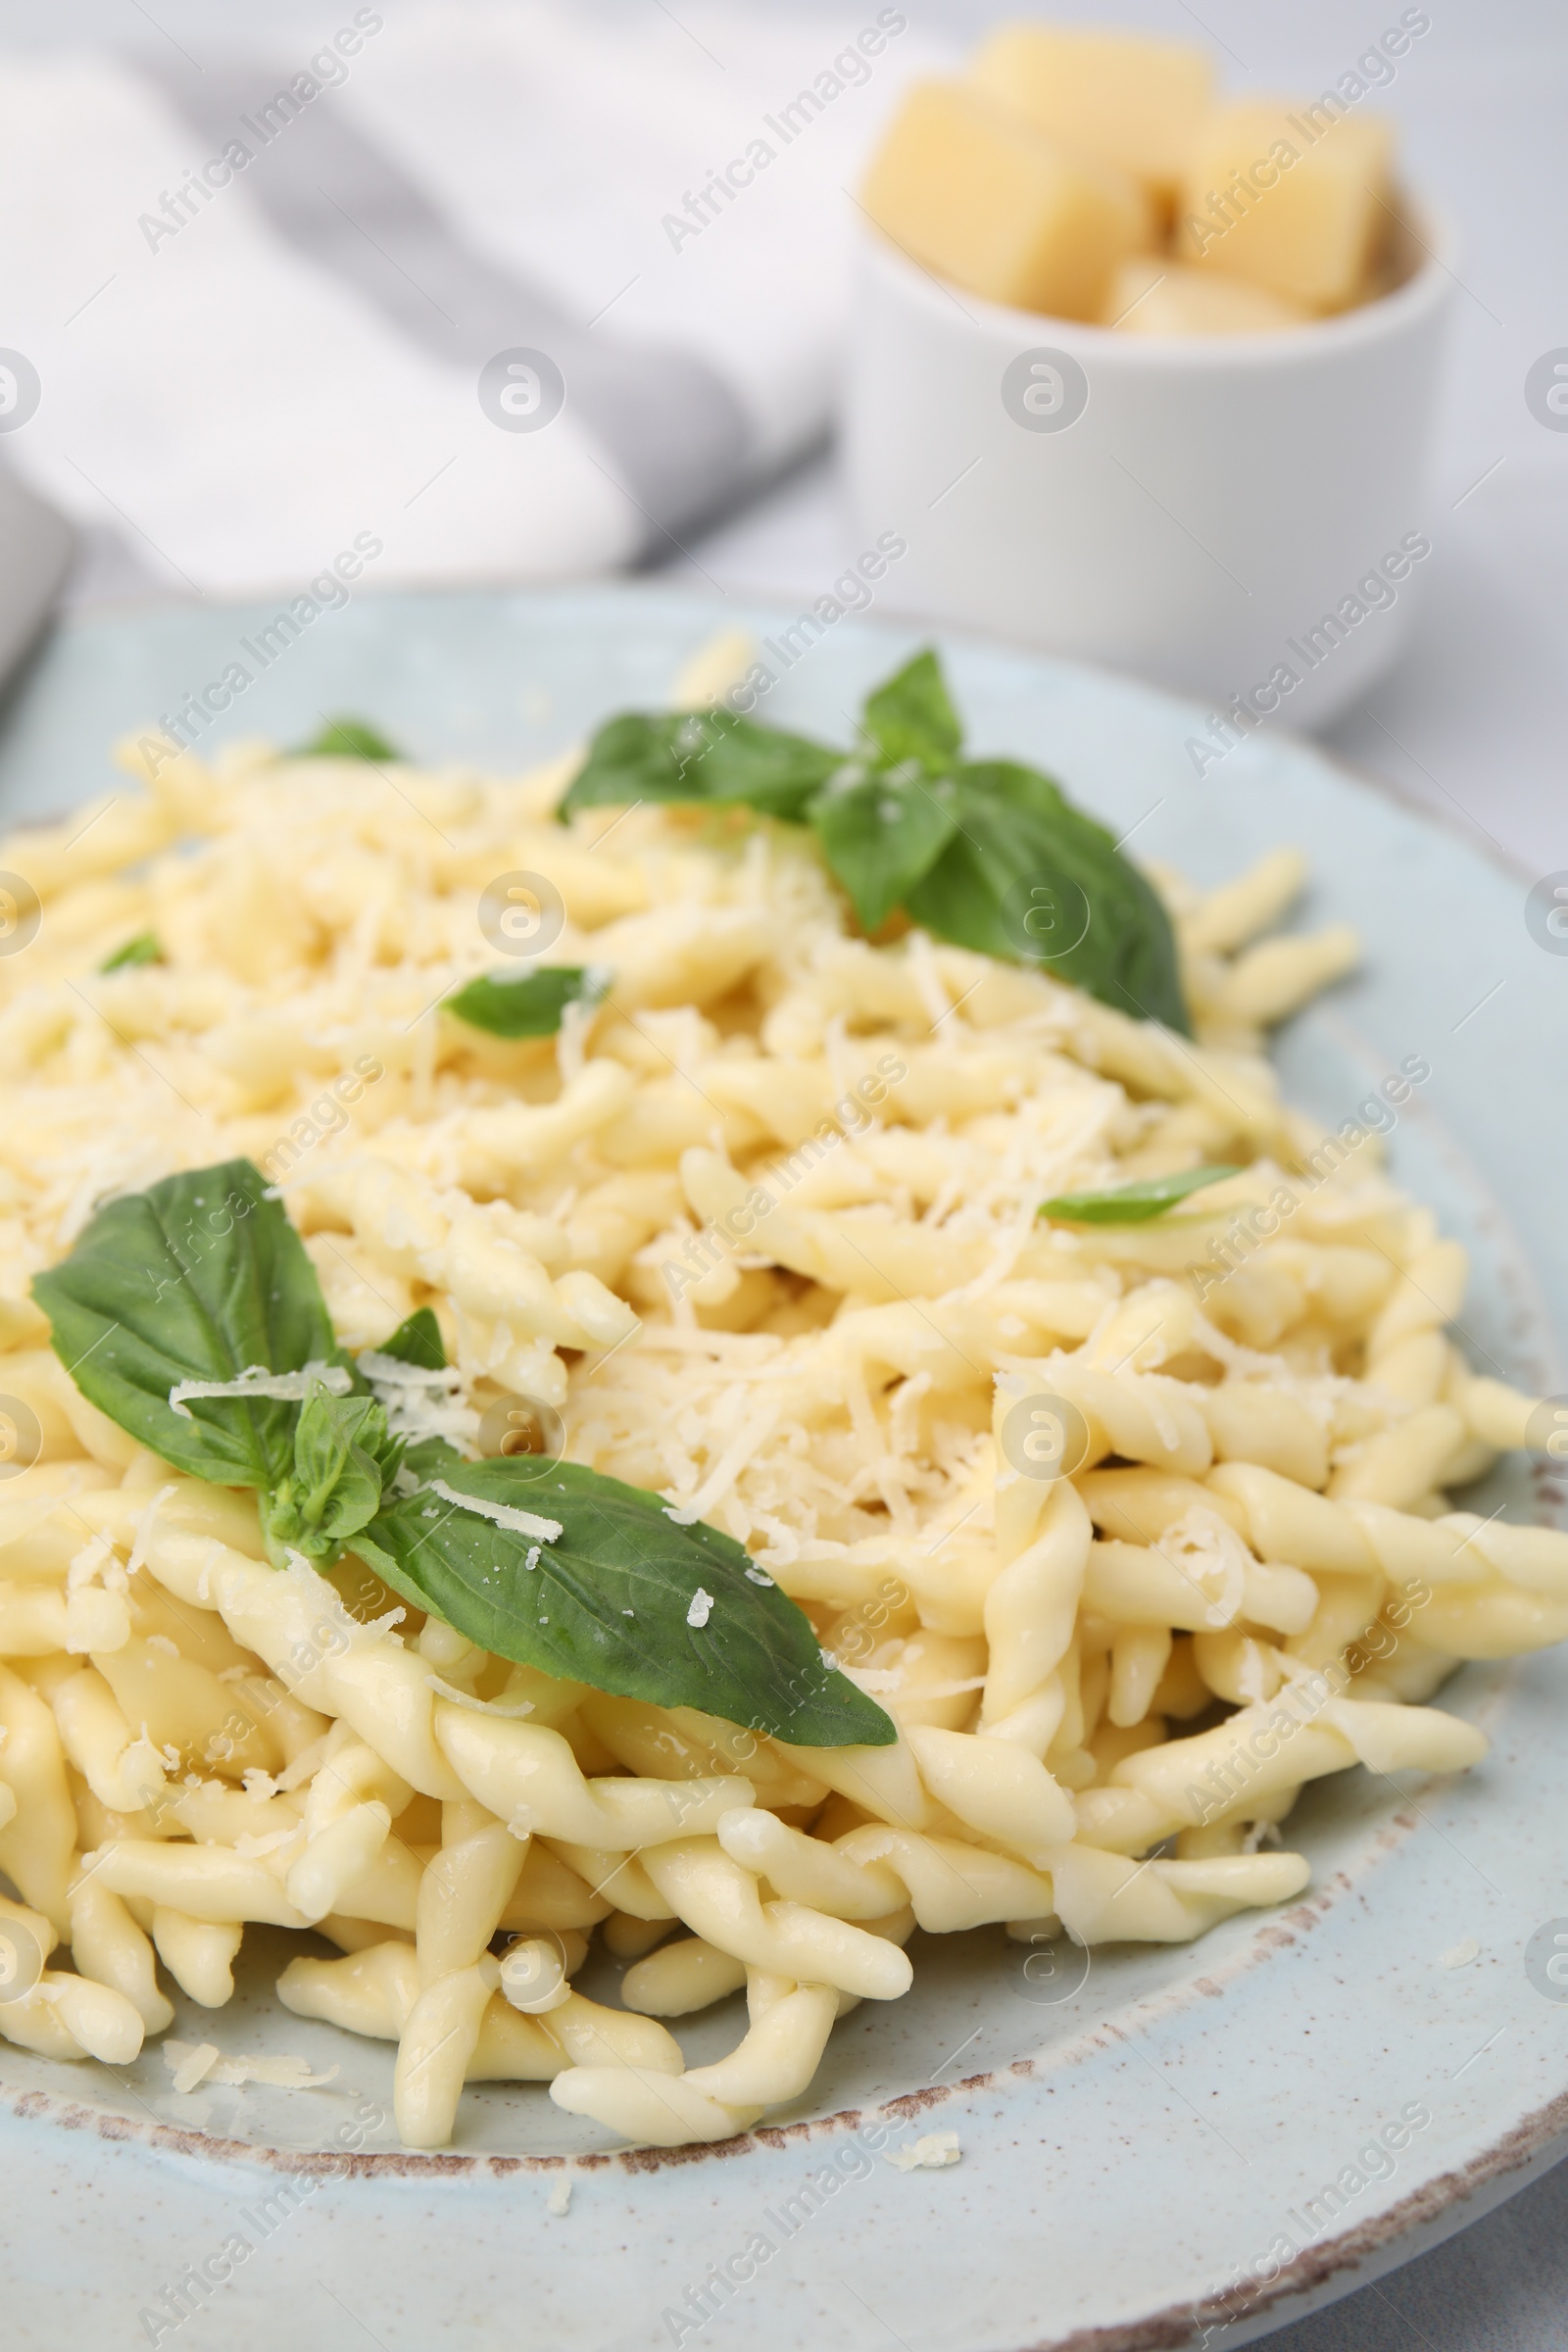 Photo of Plate of delicious trofie pasta with cheese and basil leaves on table, closeup